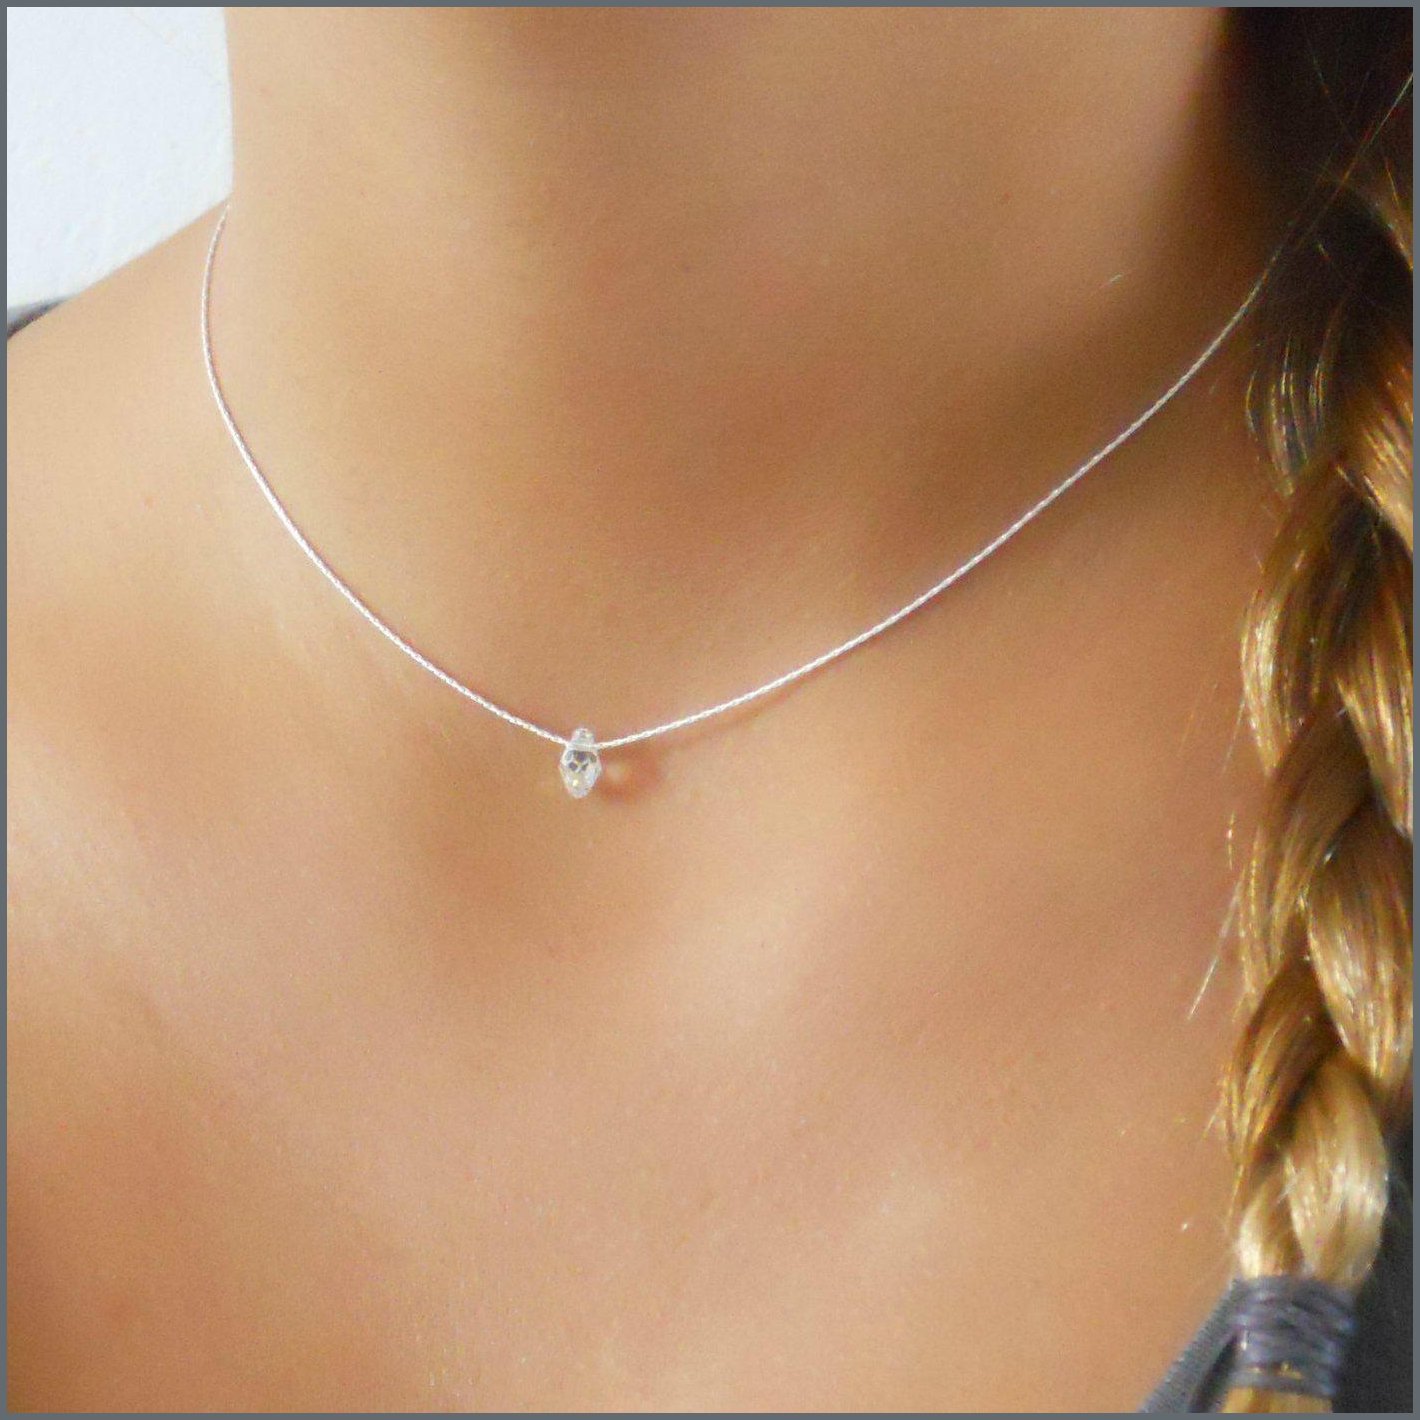 Dainty Sterling Silver Necklace With A Swarovski Drop Bead 